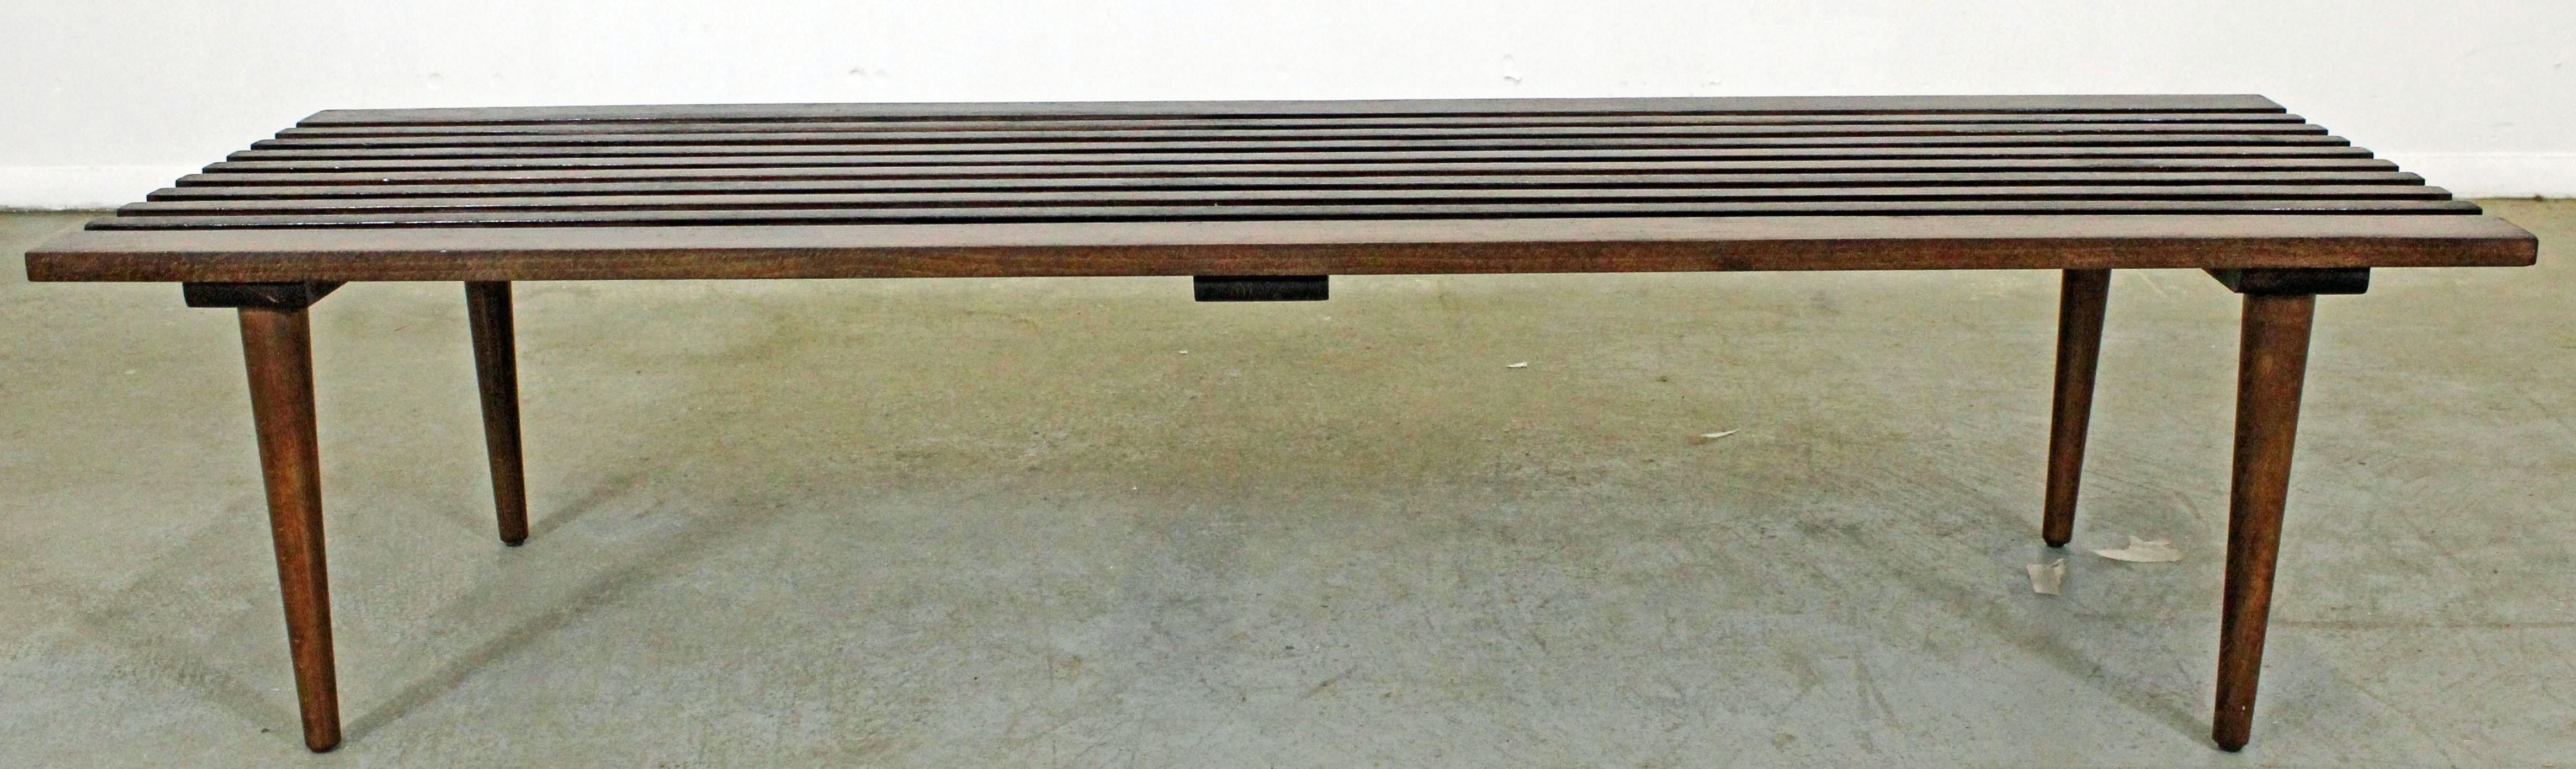 Offered is a Mid-Century Modern walnut slat bench coffee table. It is in excellent condition, has been refinished. It is not signed. Check out our other listings for more vintage, primitive and antique pieces. 

Dimensions: 
60